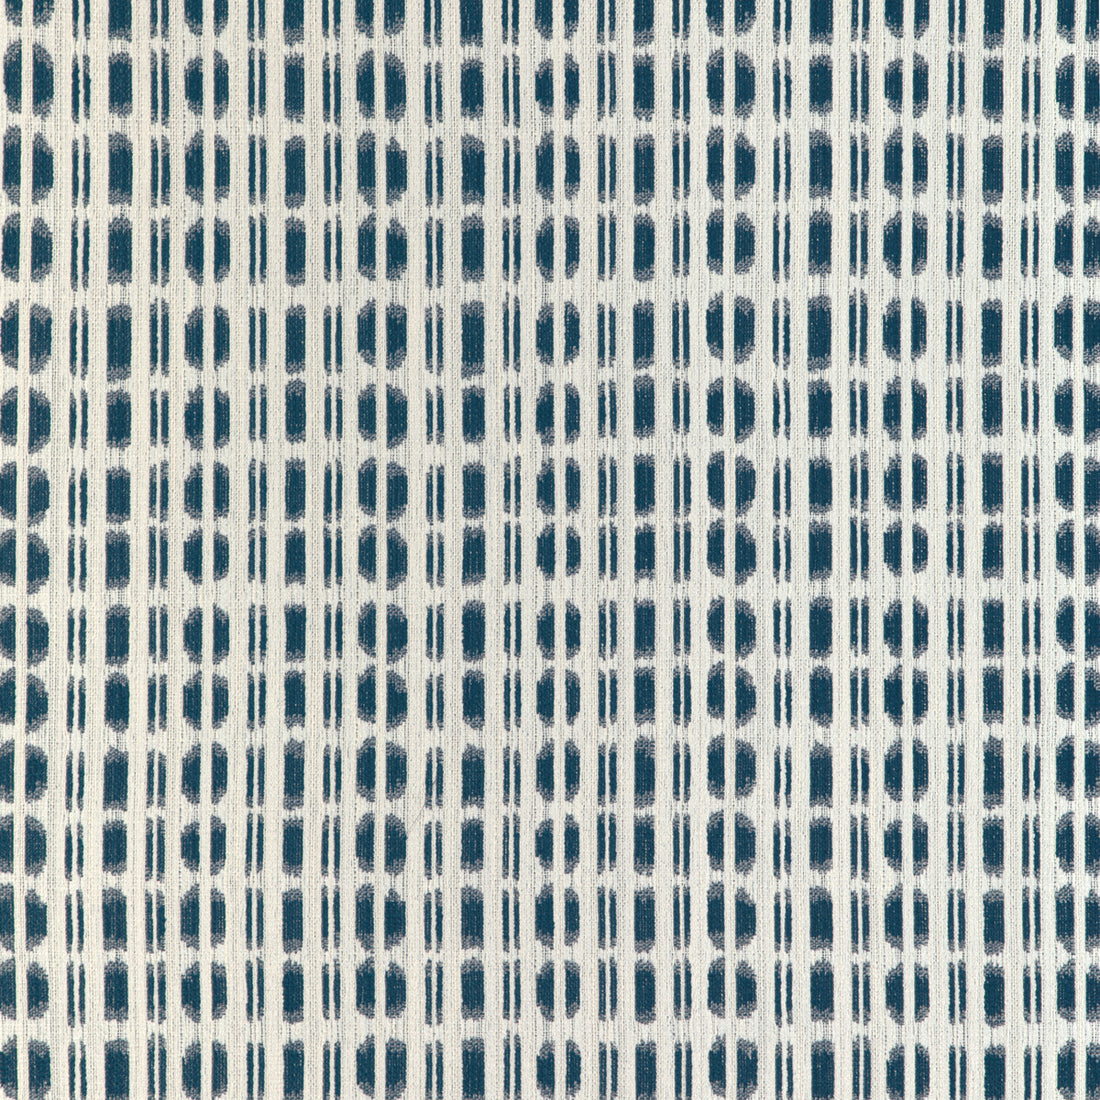 Lorax fabric in nautical color - pattern 37061.51.0 - by Kravet Design in the Thom Filicia Latitude collection